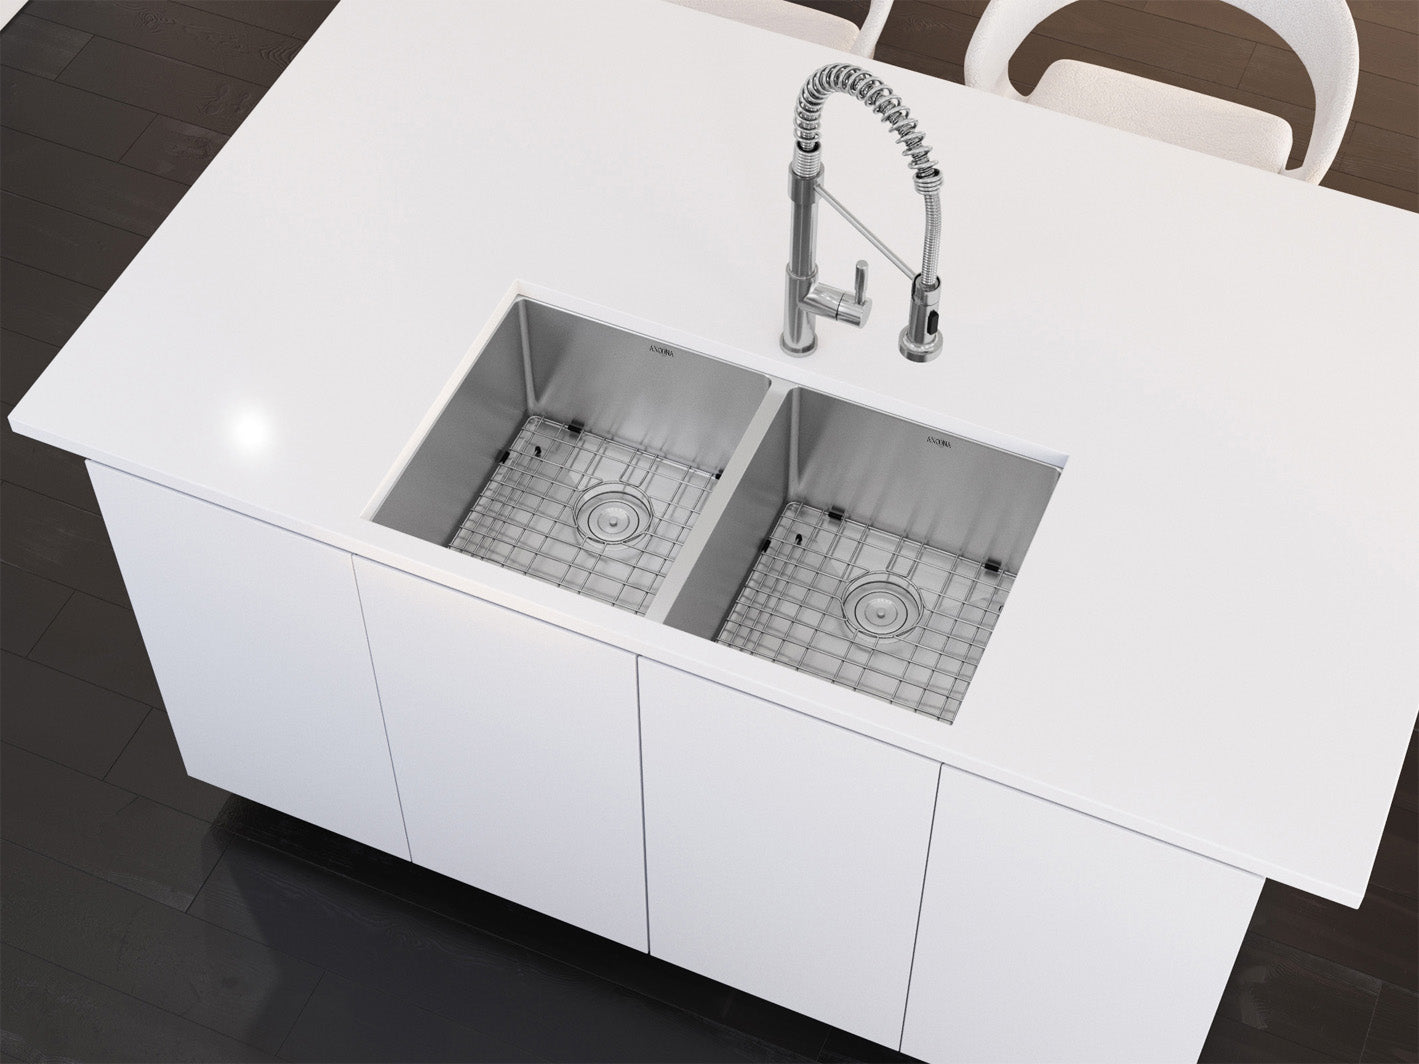 Prestige Series Undermount Stainless Steel 32 in. 50/50 Double Bowl Kitchen Sink in Satin Finish with Grids and Strainers